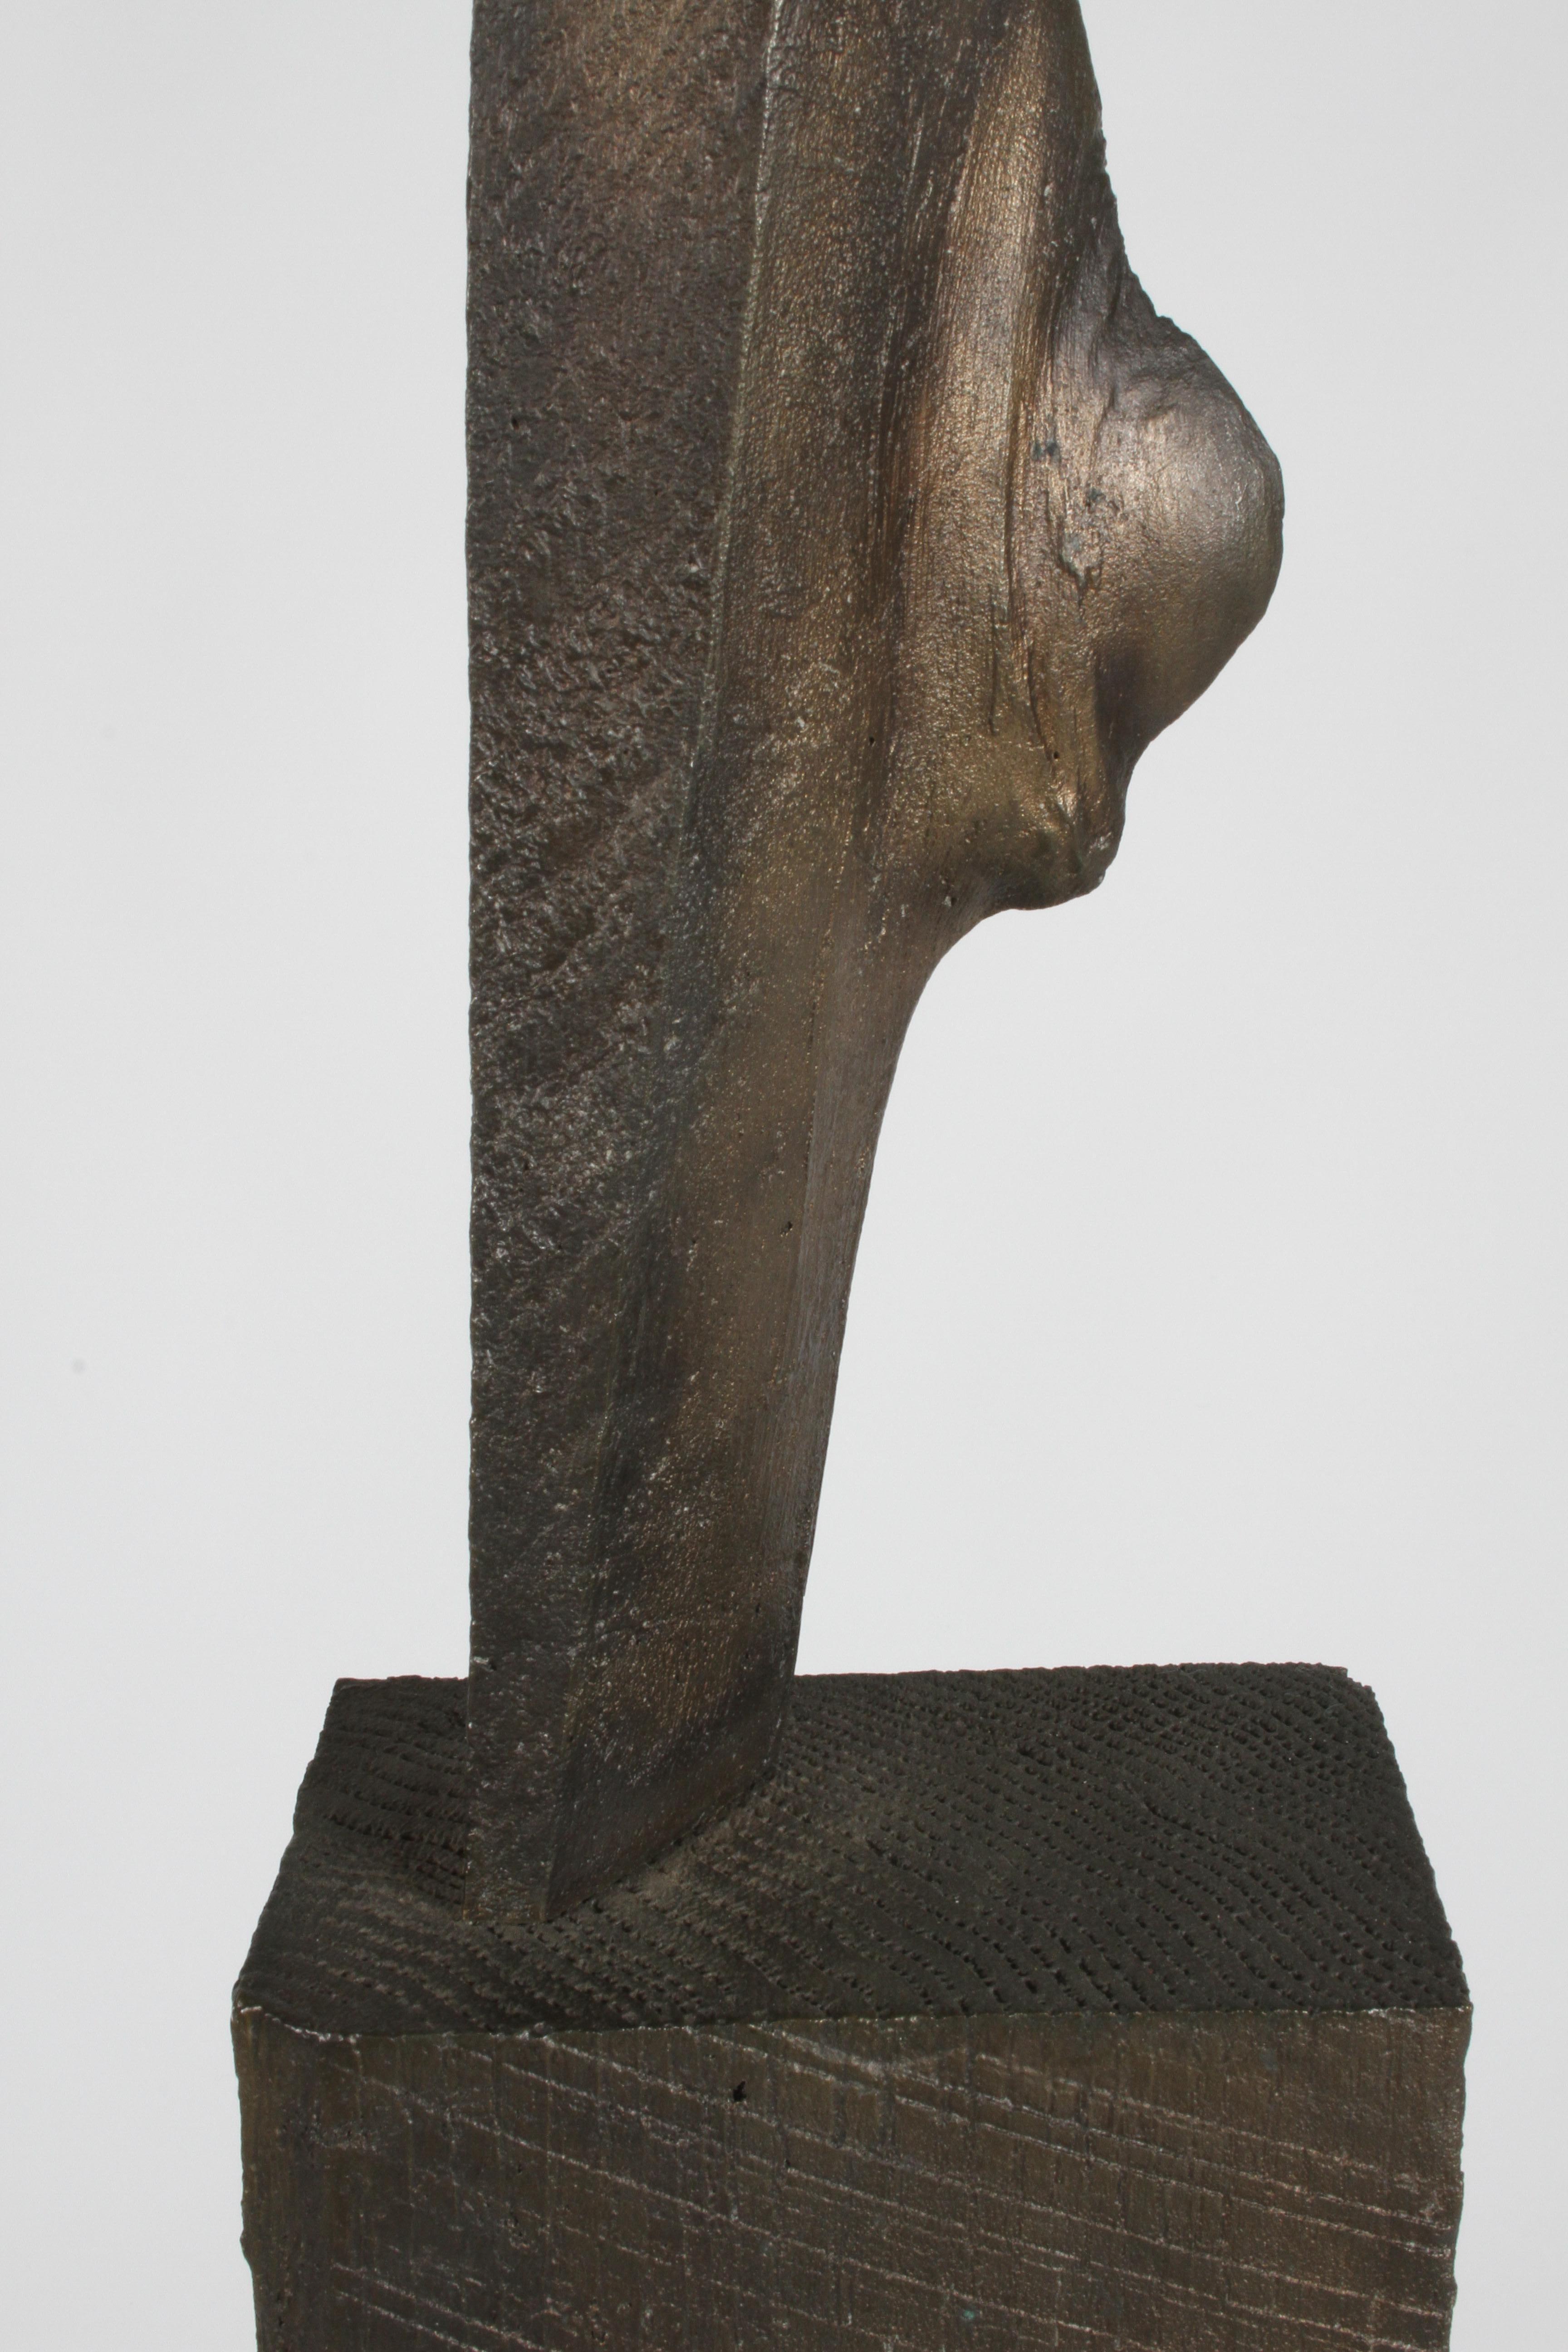 Mid-Century Modern Bronze with Wood Texture Brutalist Style TOTEM Form Sculpture In Good Condition For Sale In St. Louis, MO